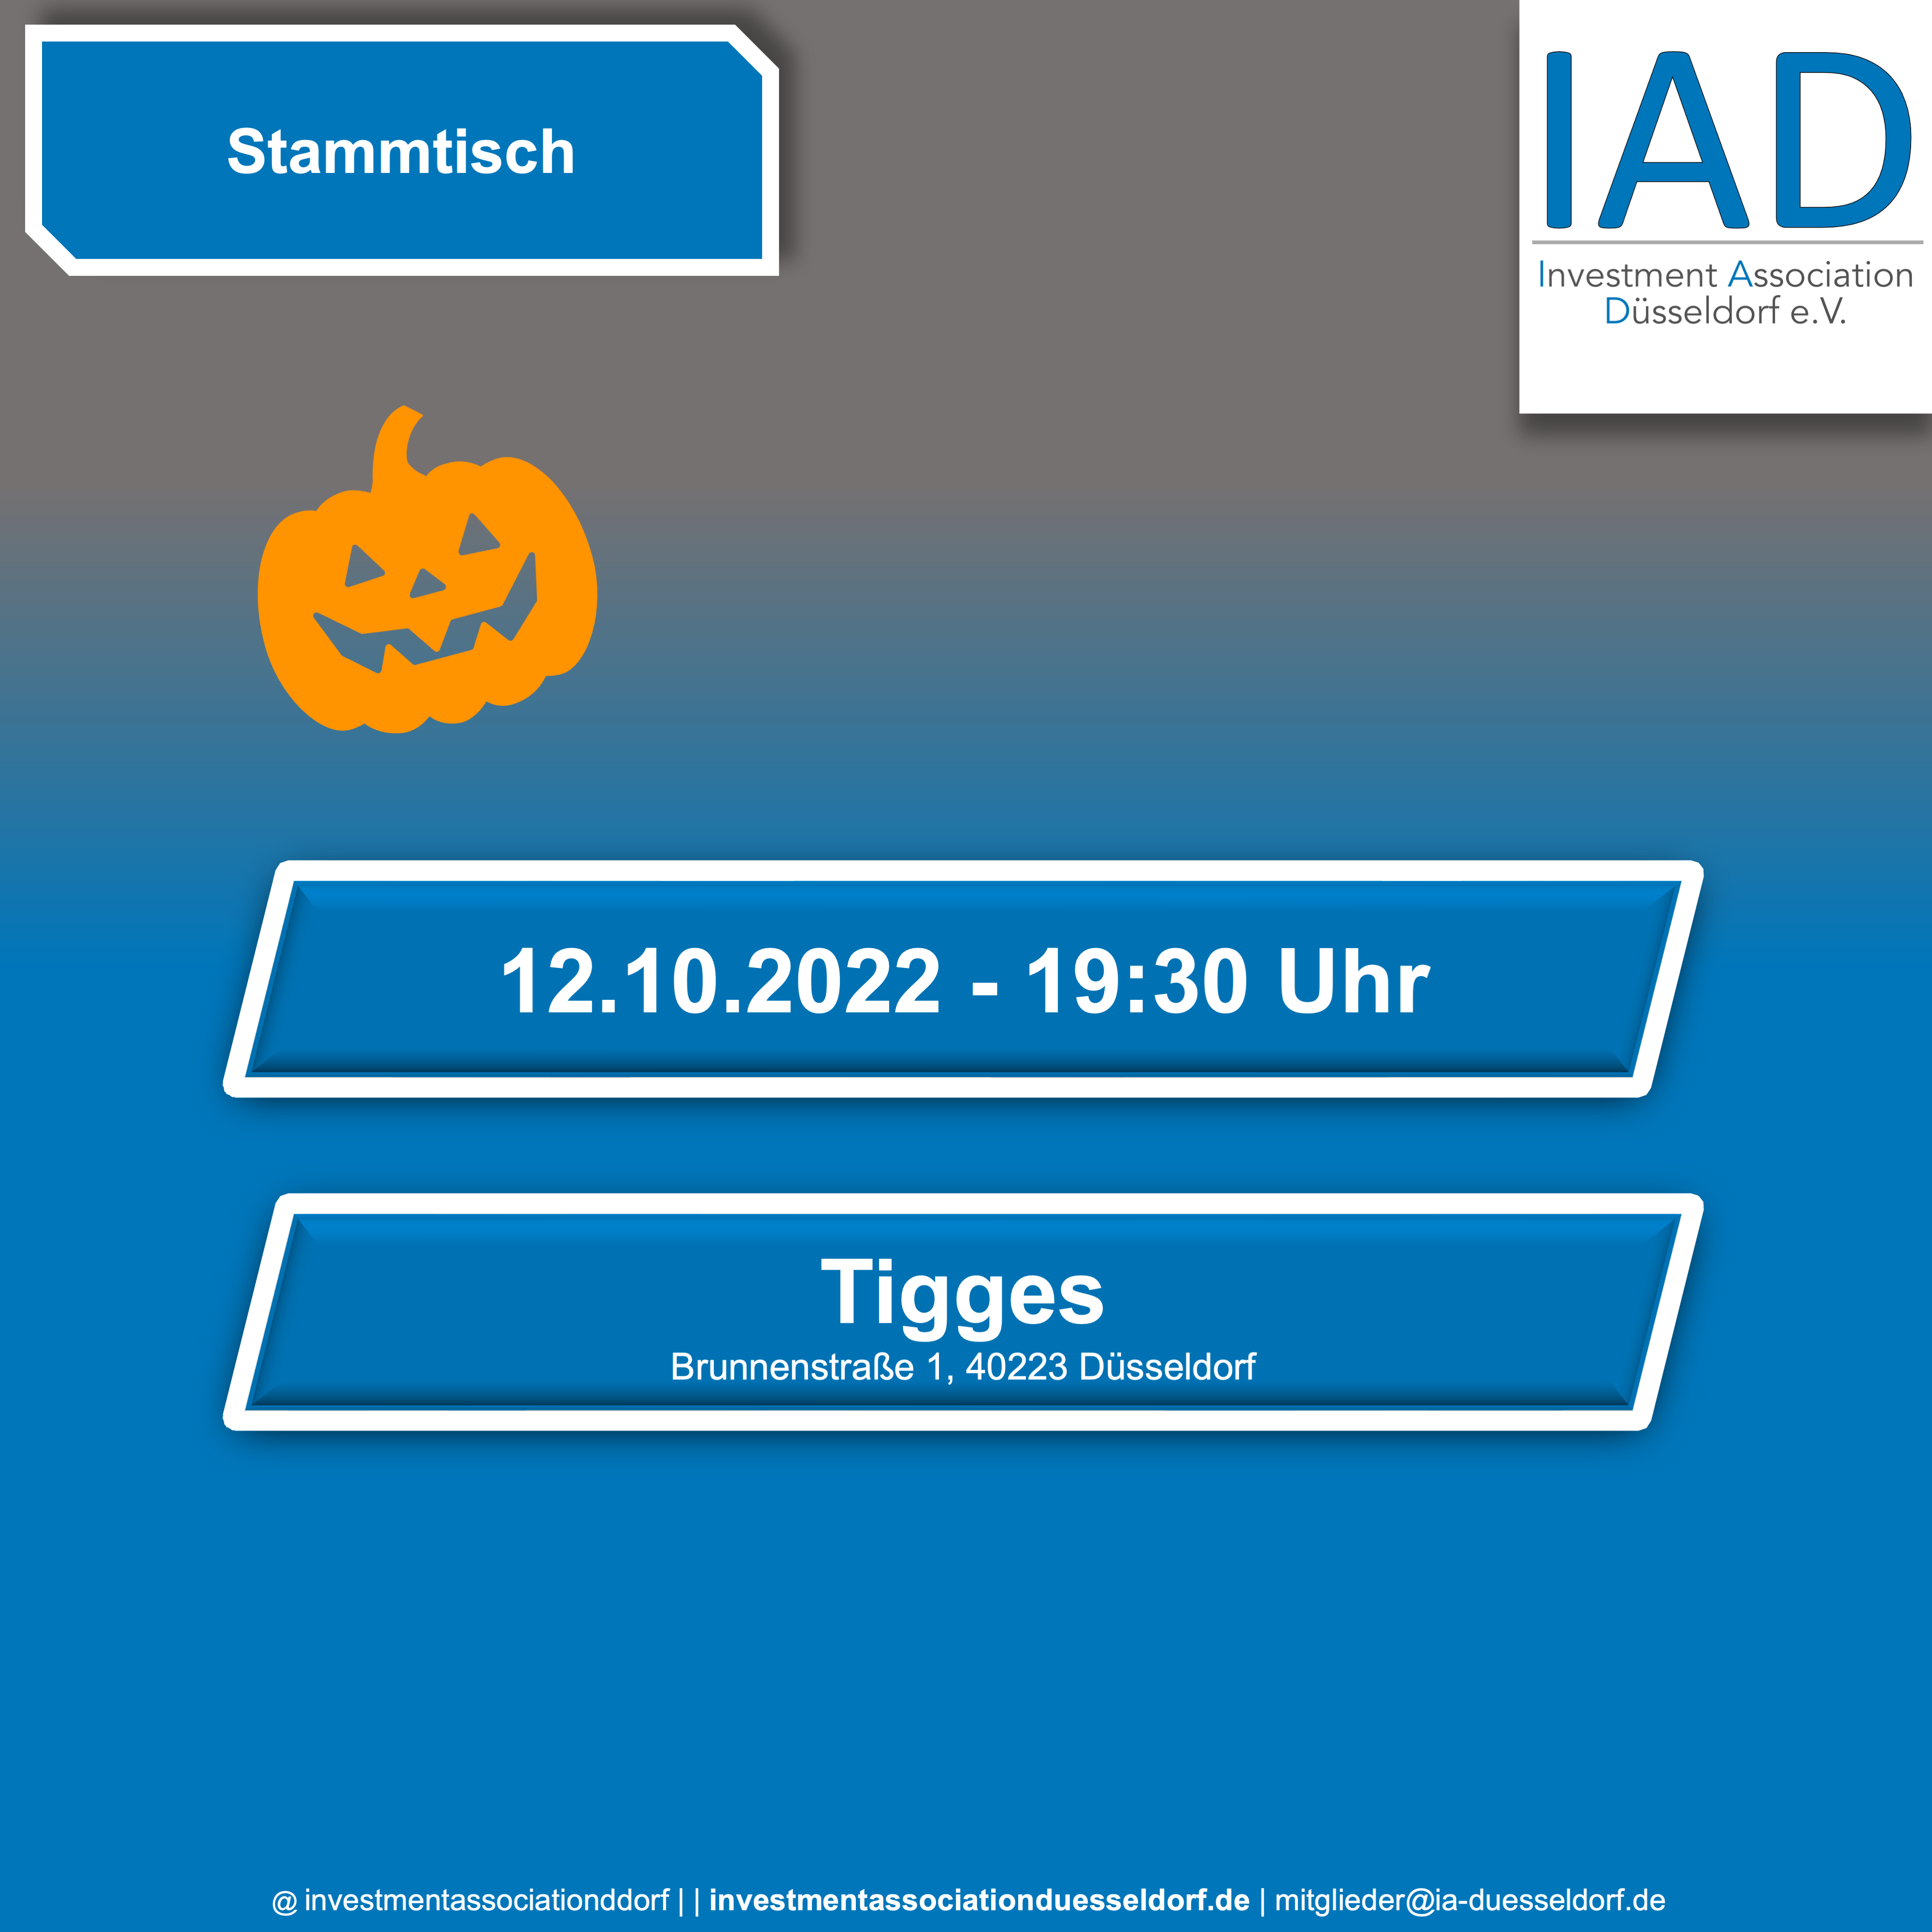 You are currently viewing IAD-Stammtisch (12.10.2022 – 19:30 Uhr)